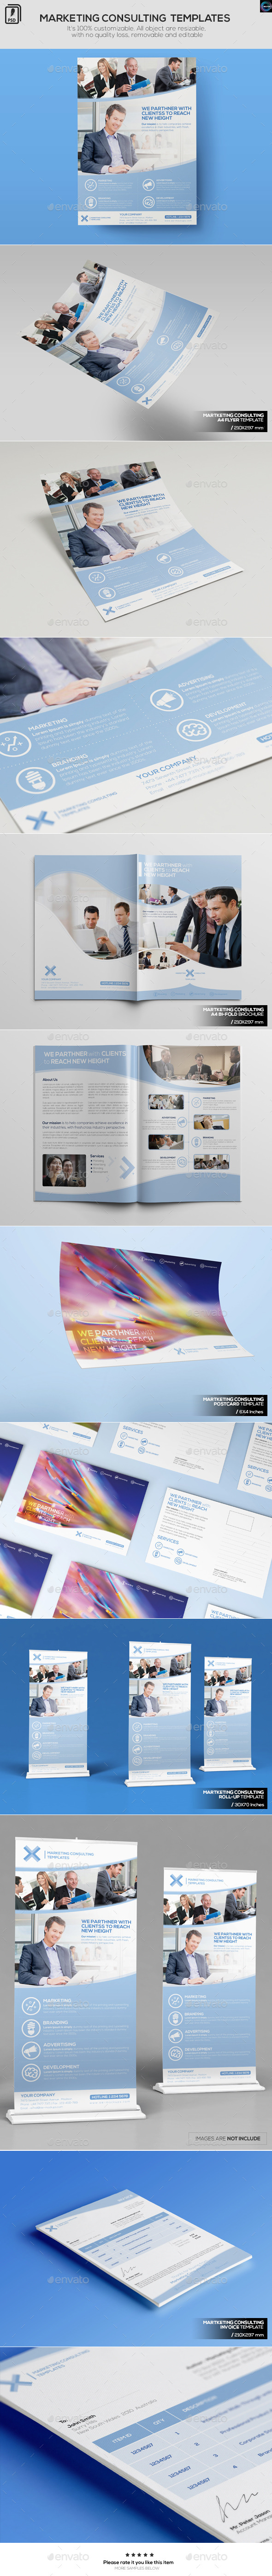 GraphicRiver Marketing Consulting Templates 11942850